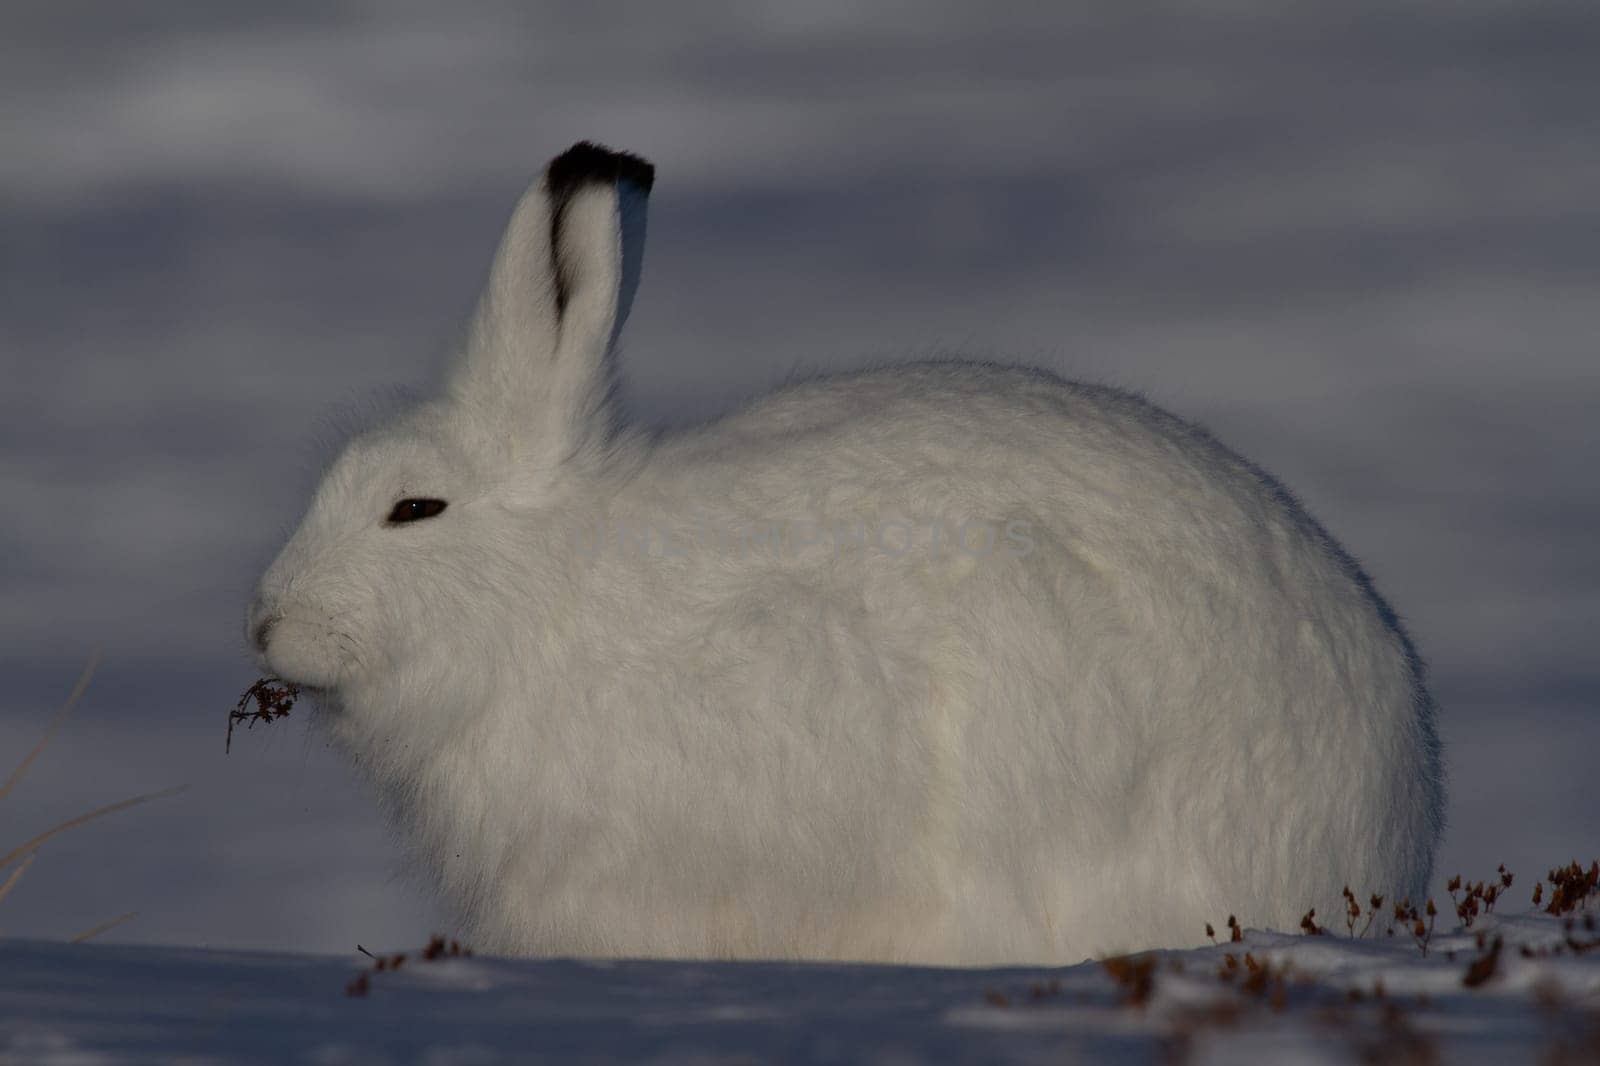 Arctic hare or Lepus arcticus in winter coat chewing on a willow branch with snow in the background, near Arviat, Nunavut, Canada